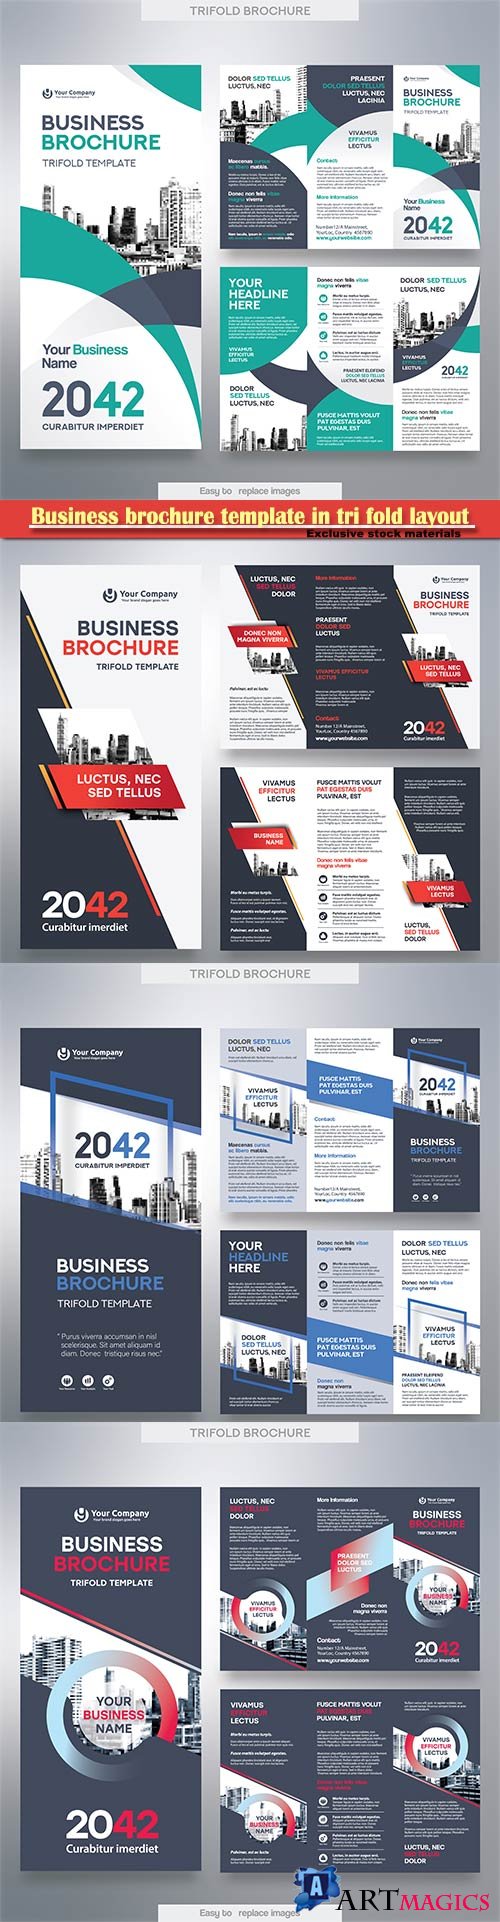 Business brochure template in tri fold layout, corporate design vector illustration